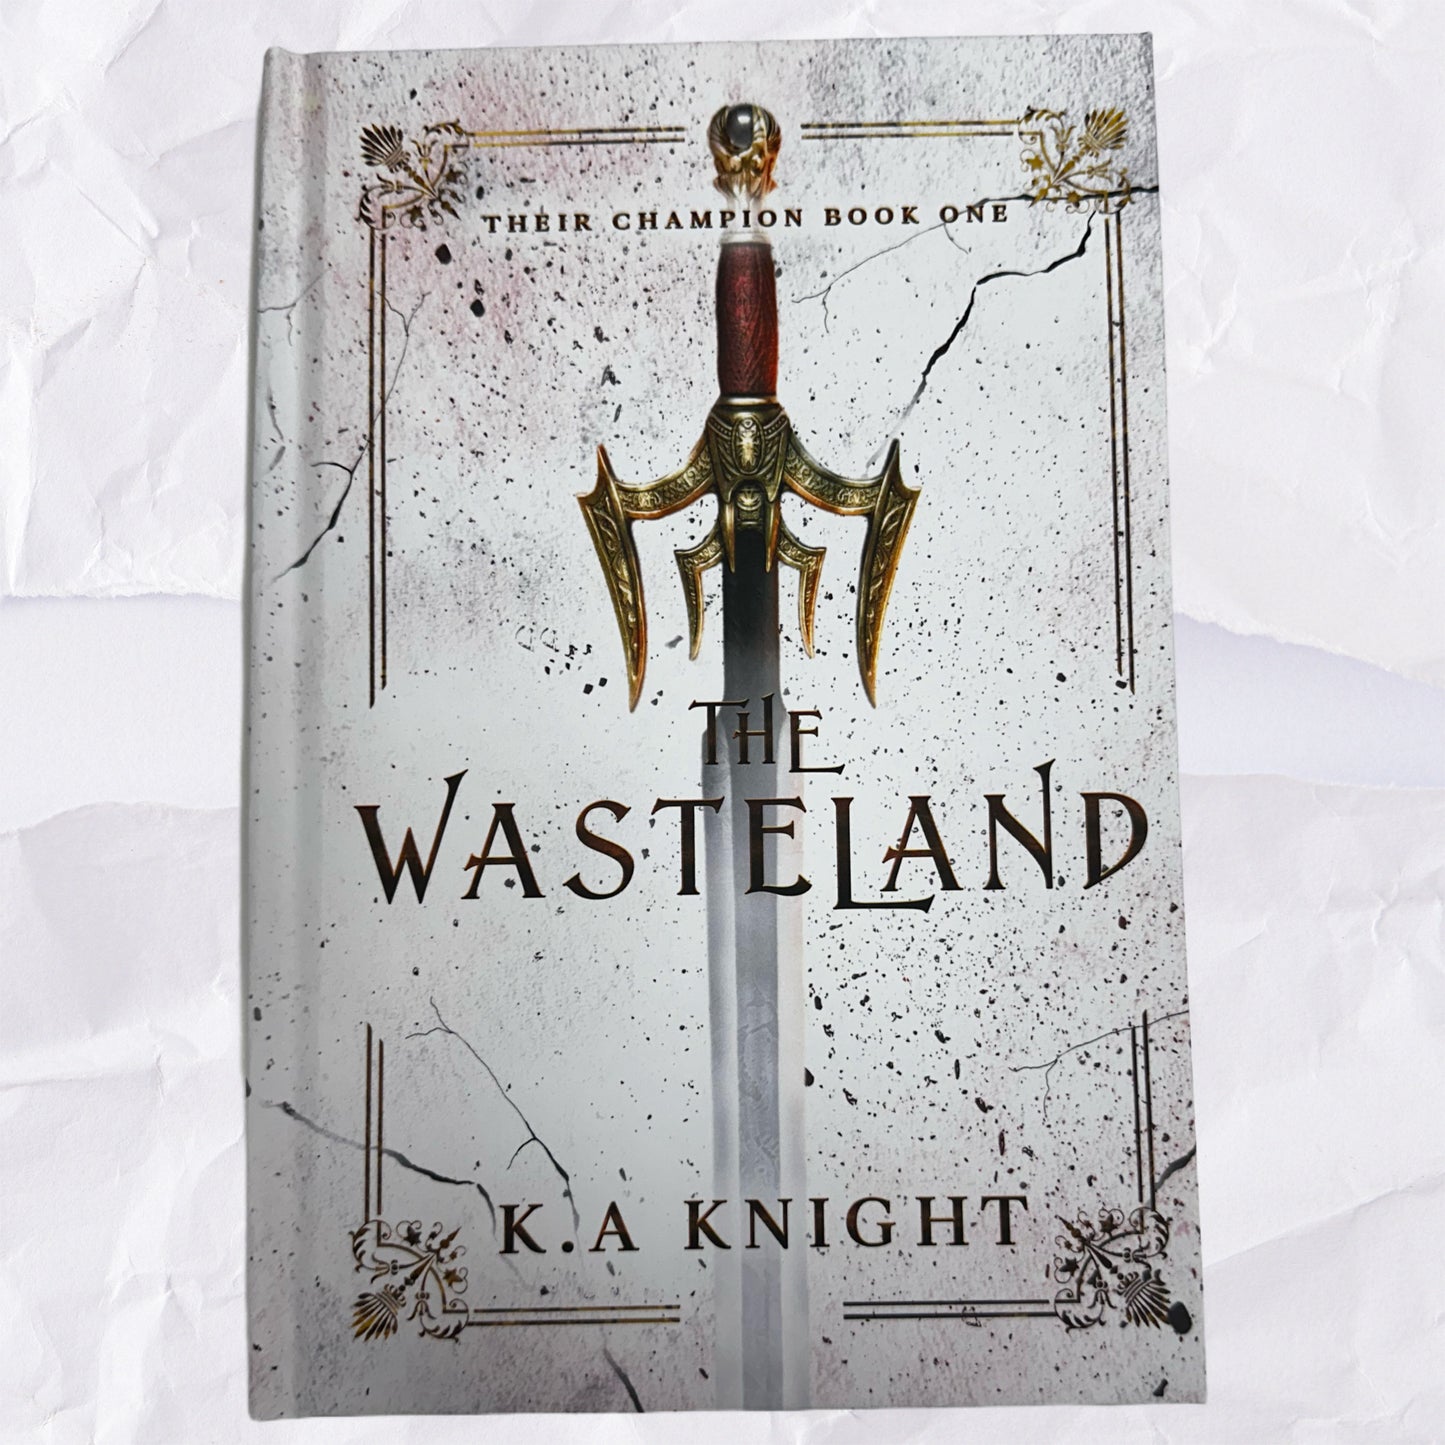 The Wasteland (Their Champion #1) by K.A Knight